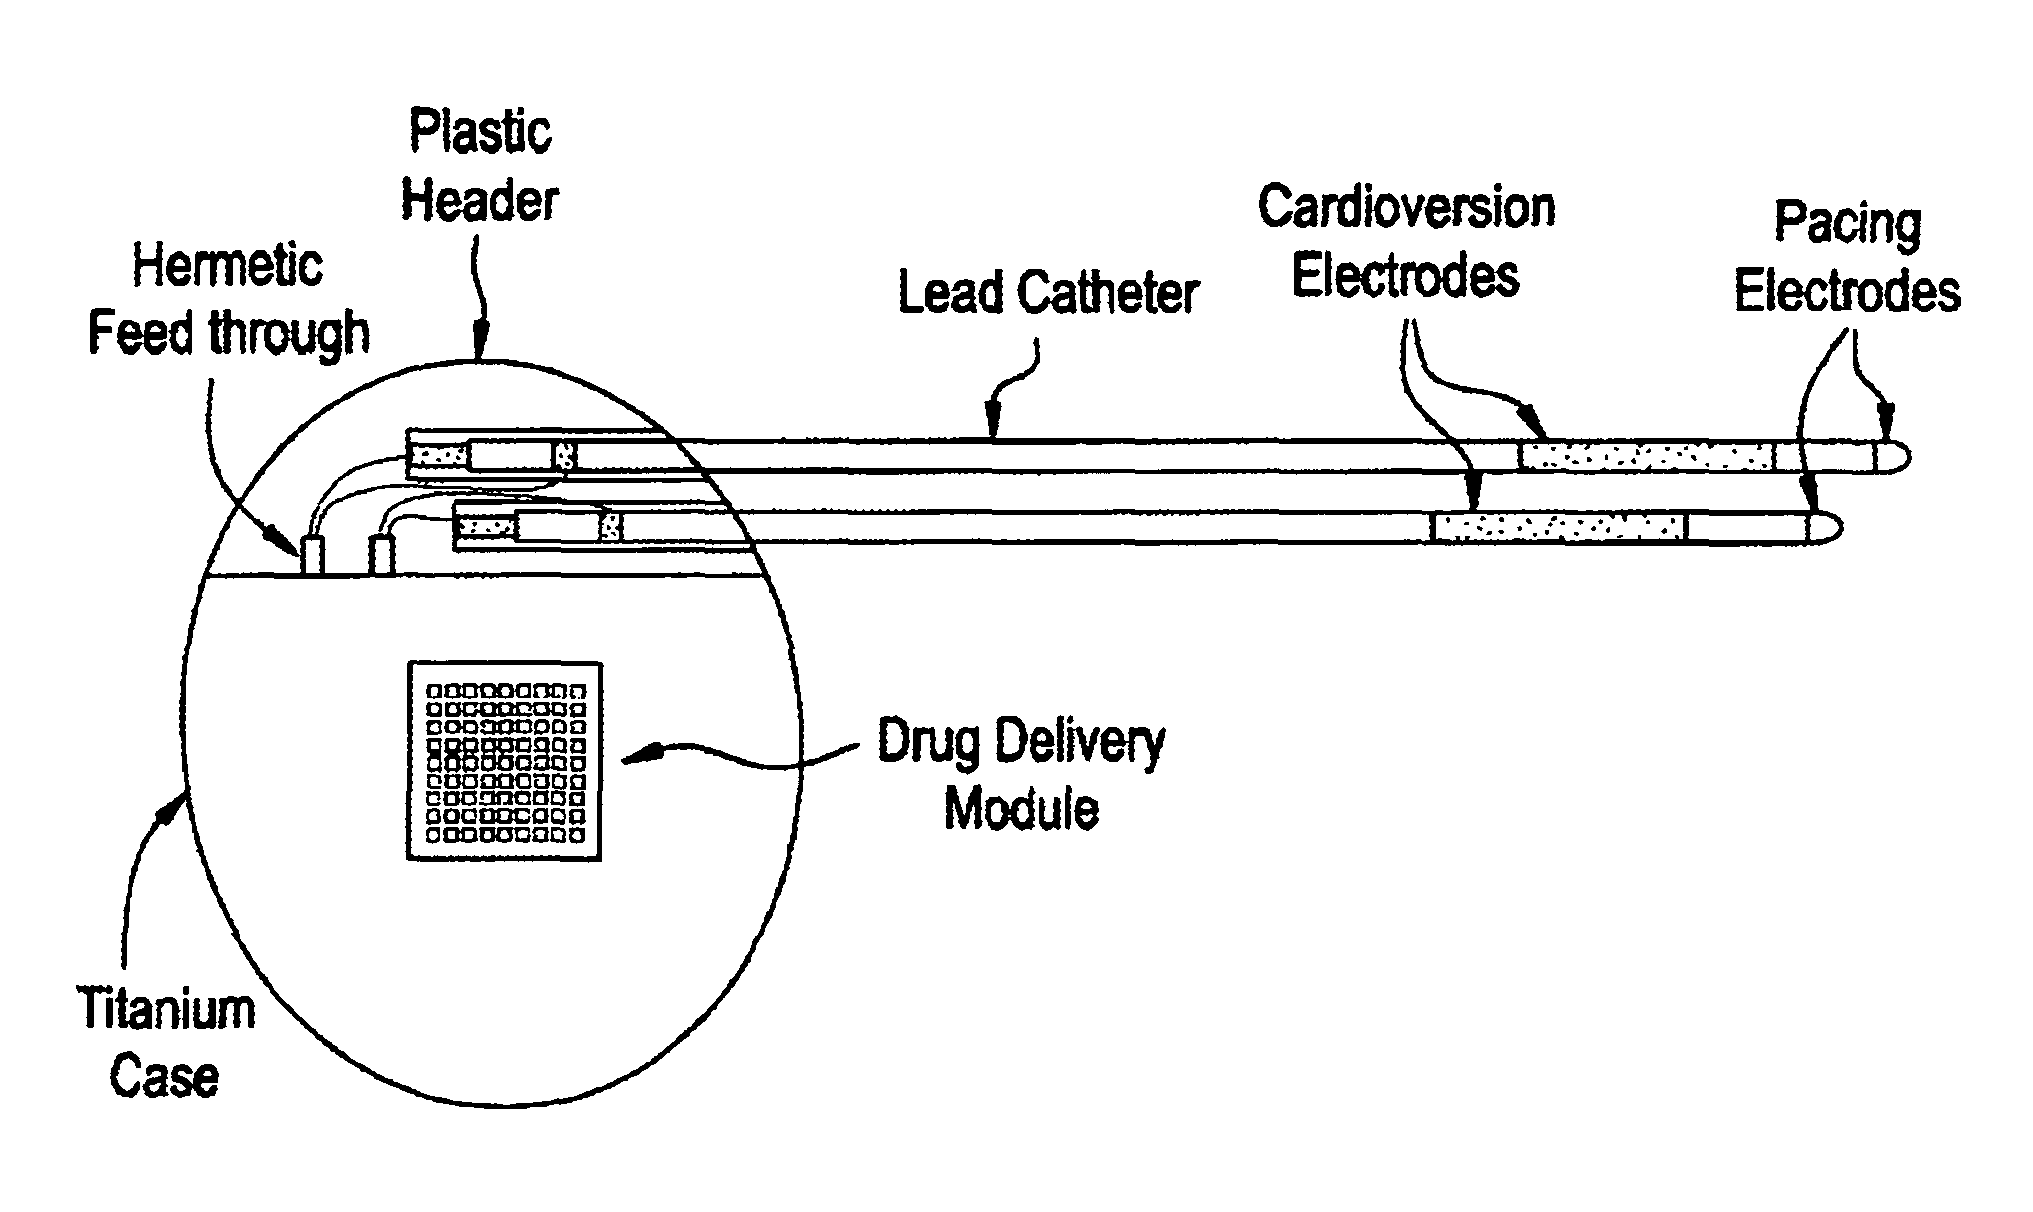 Medical device for controlled drug delivery and cardiac monitoring and/or stimulation